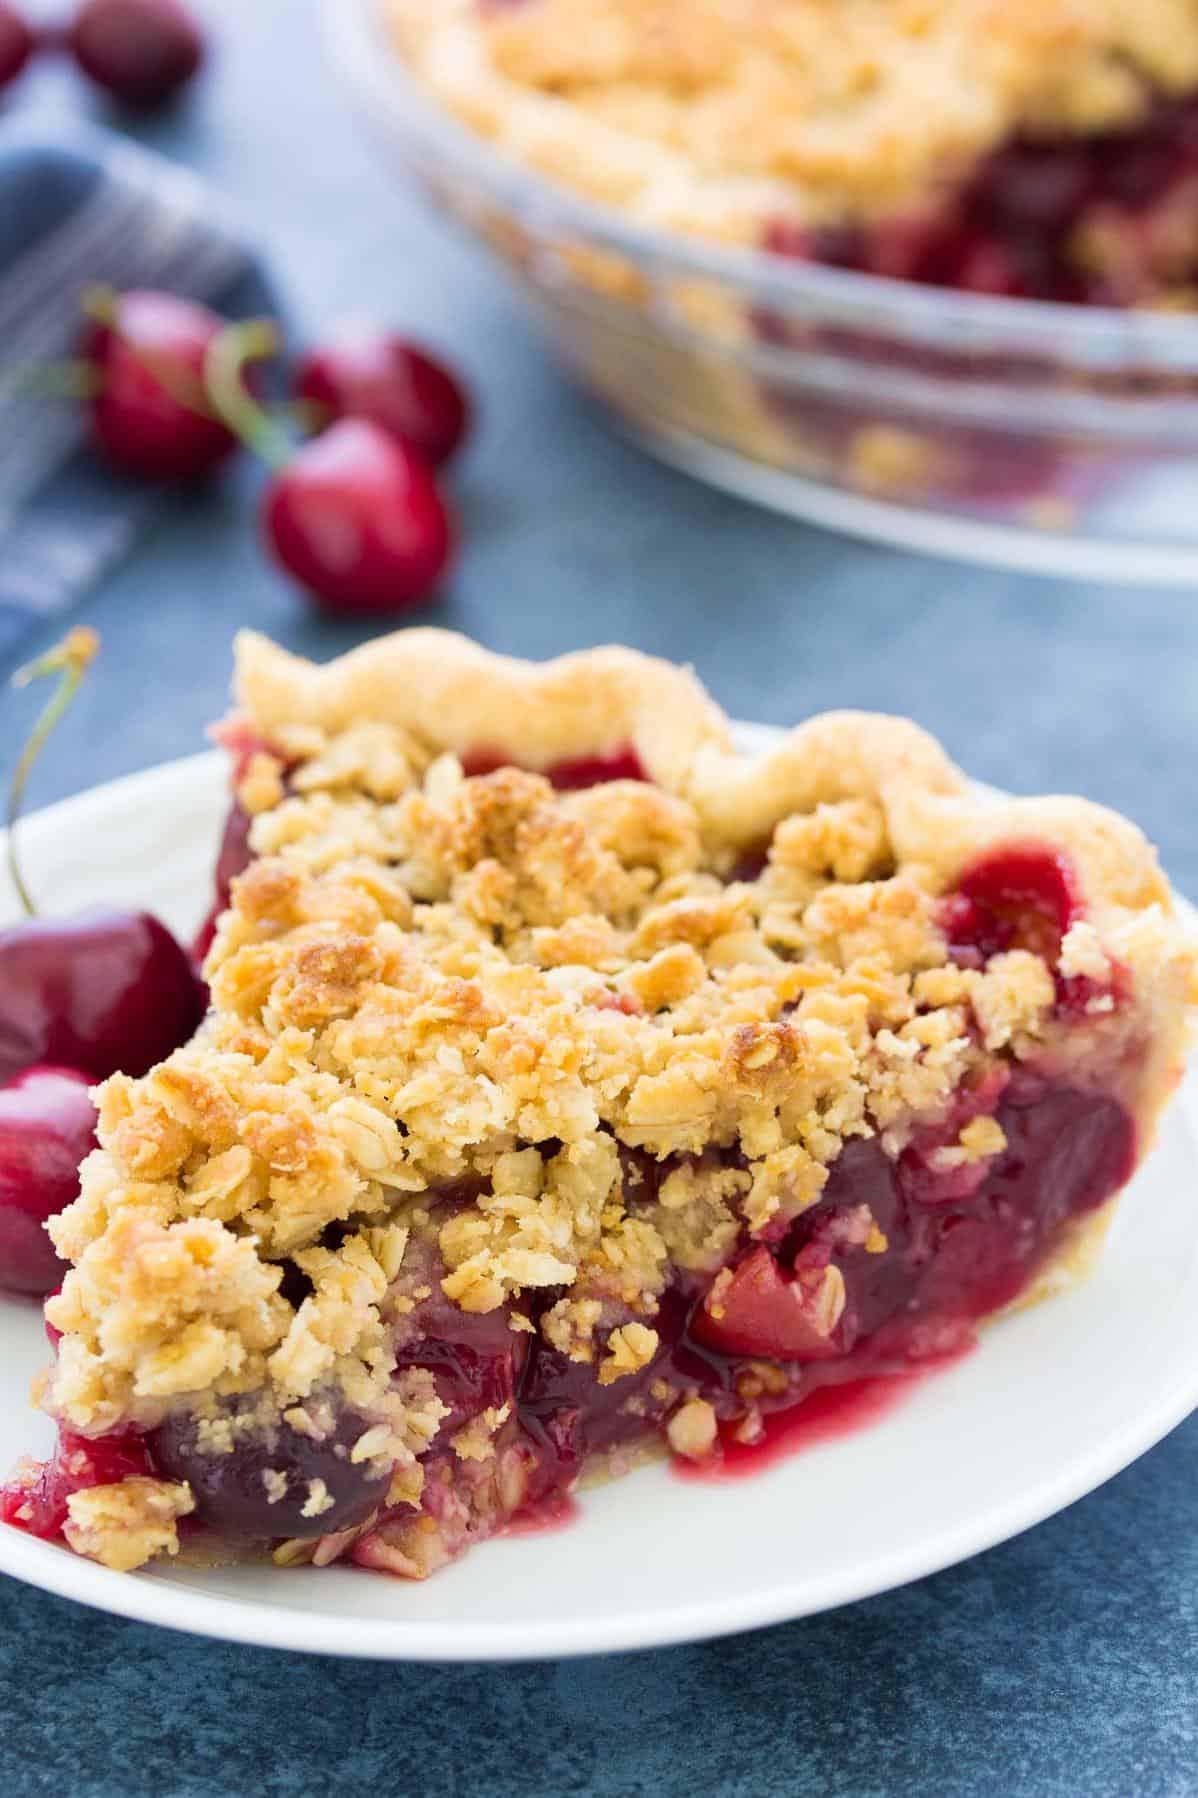  Impress your friends with this scrumptious Keebler Cherry Crunch Pie!